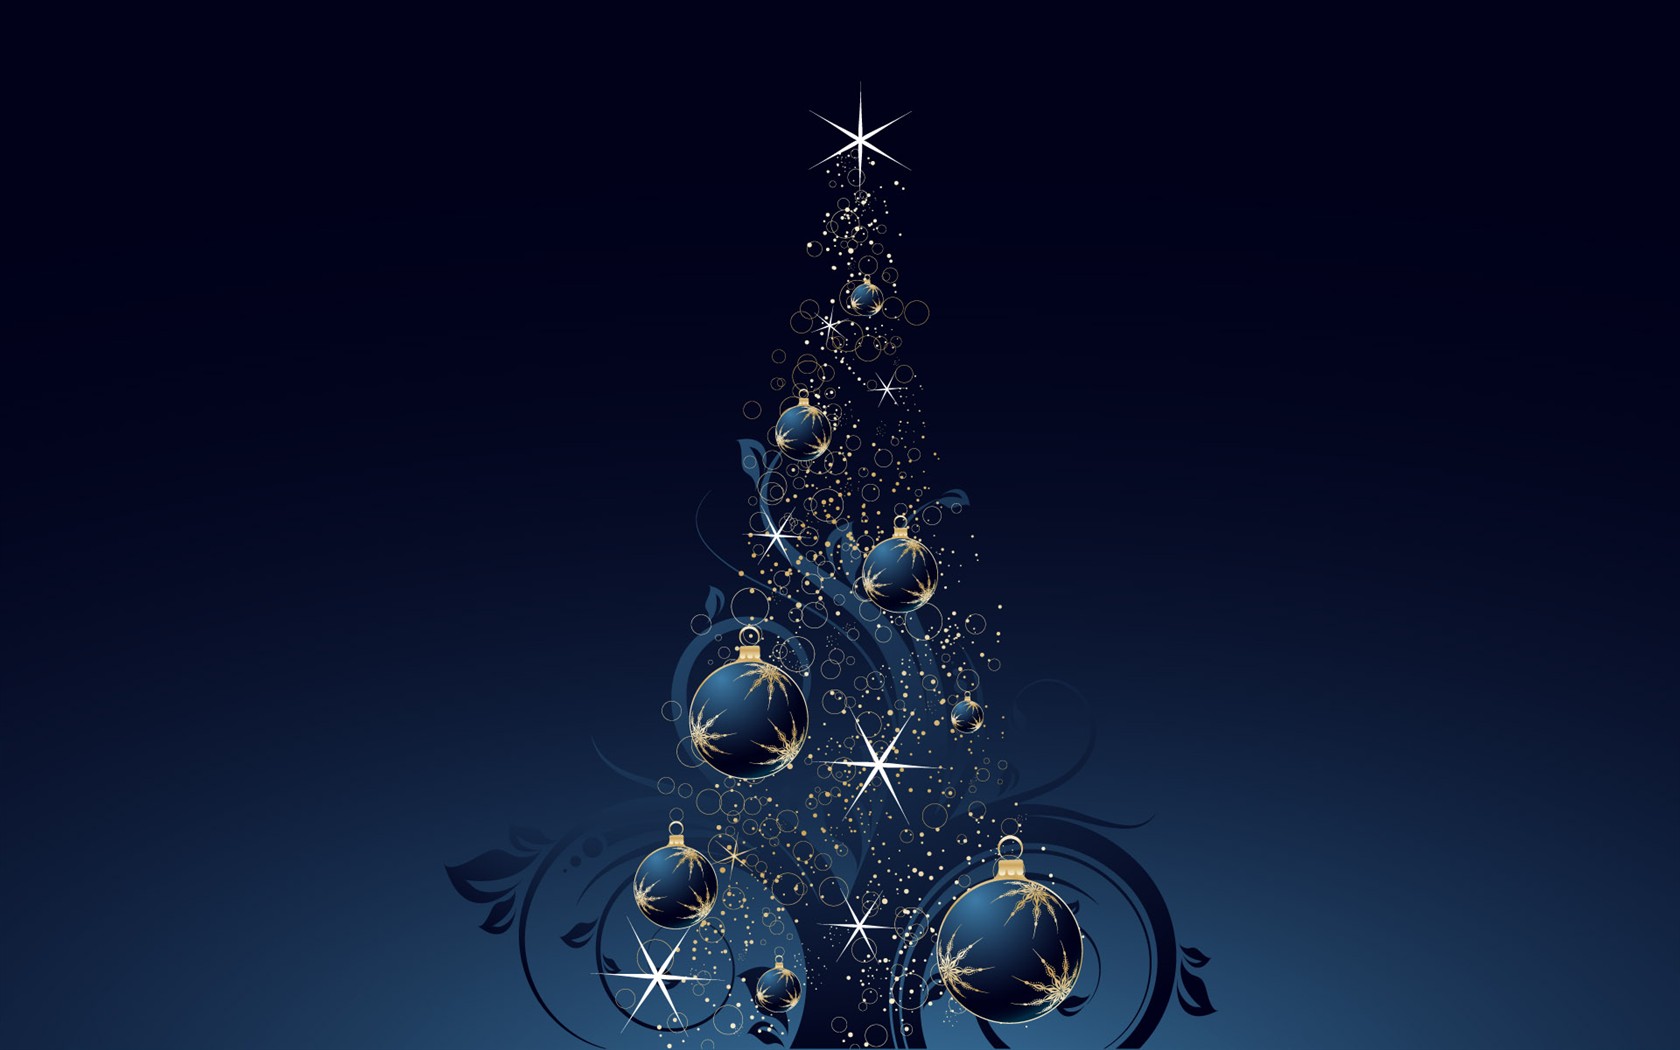 Exquisite Christmas Theme HD Wallpapers #37 - 1680x1050